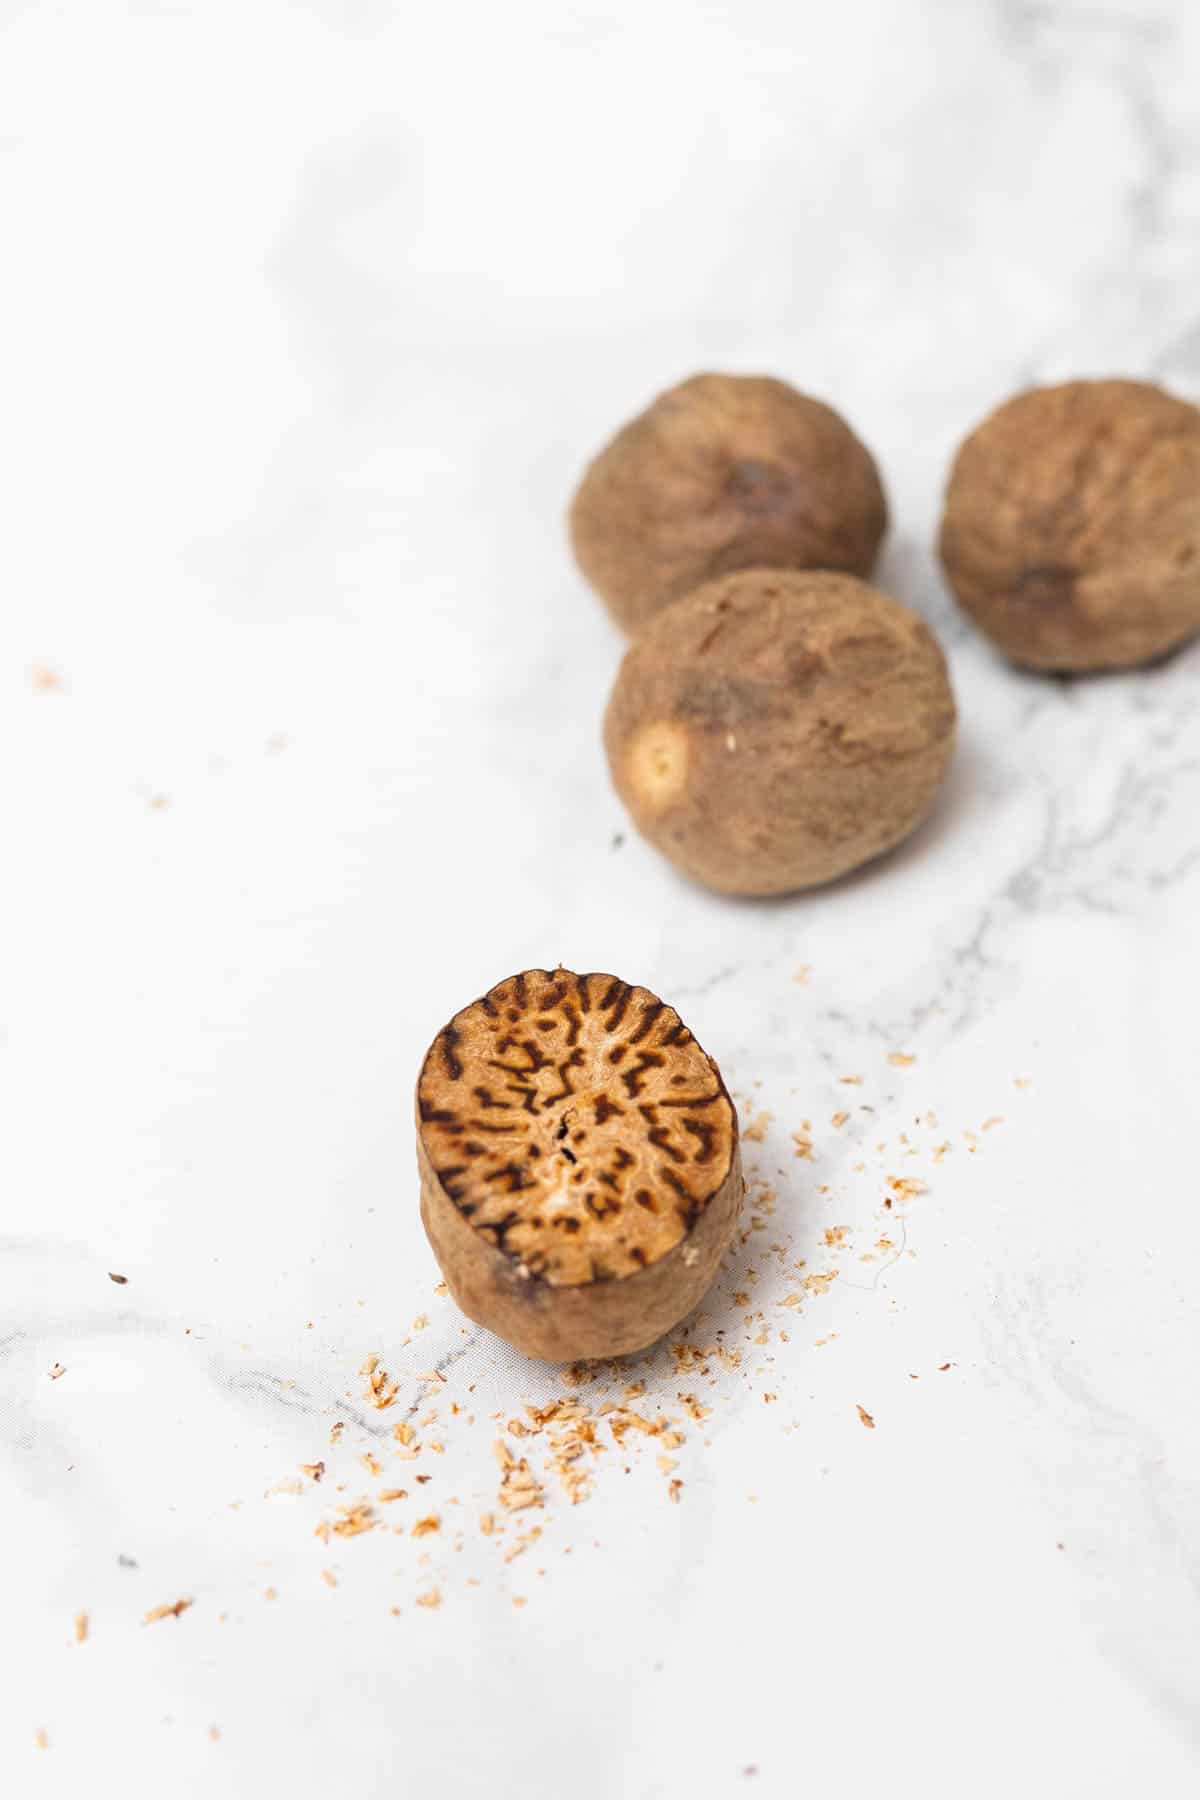 Grated fresh nutmeg showing inside with pile of nutmeg in background